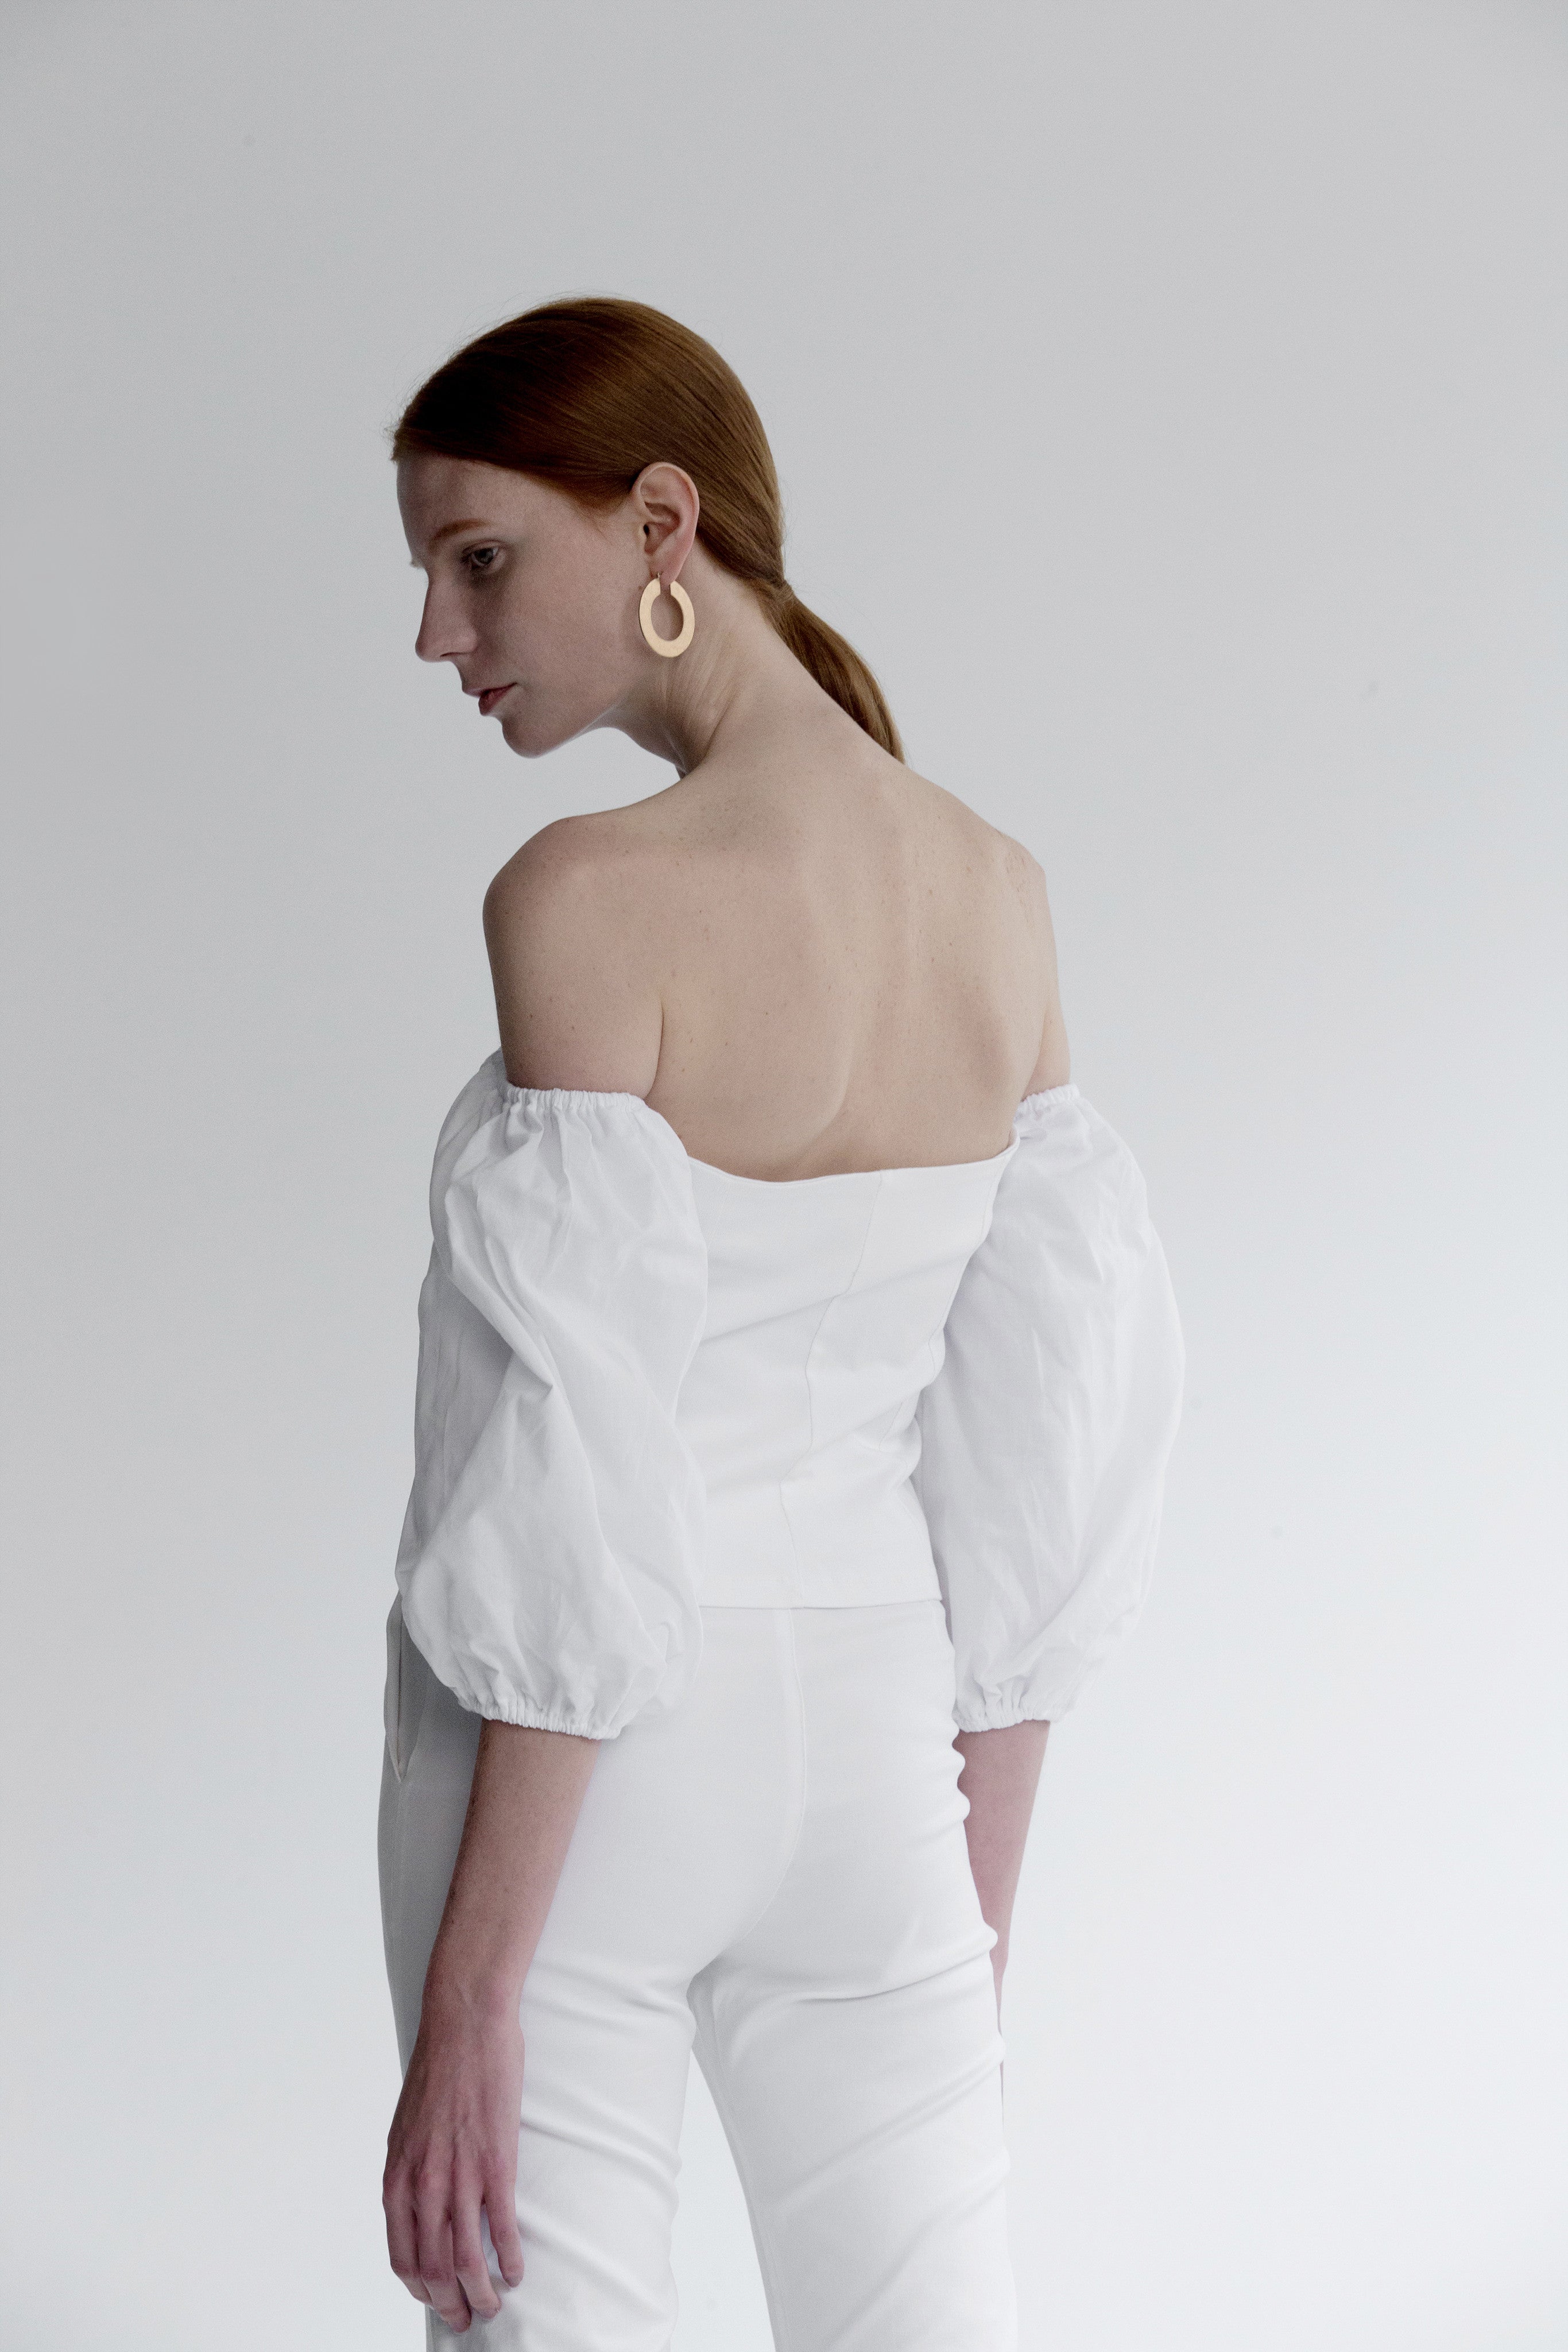 The Nahera Top in white featuring off-the-shoulder with long sleeves, self-tied closure and concealed zip opening along side. Cropped length.